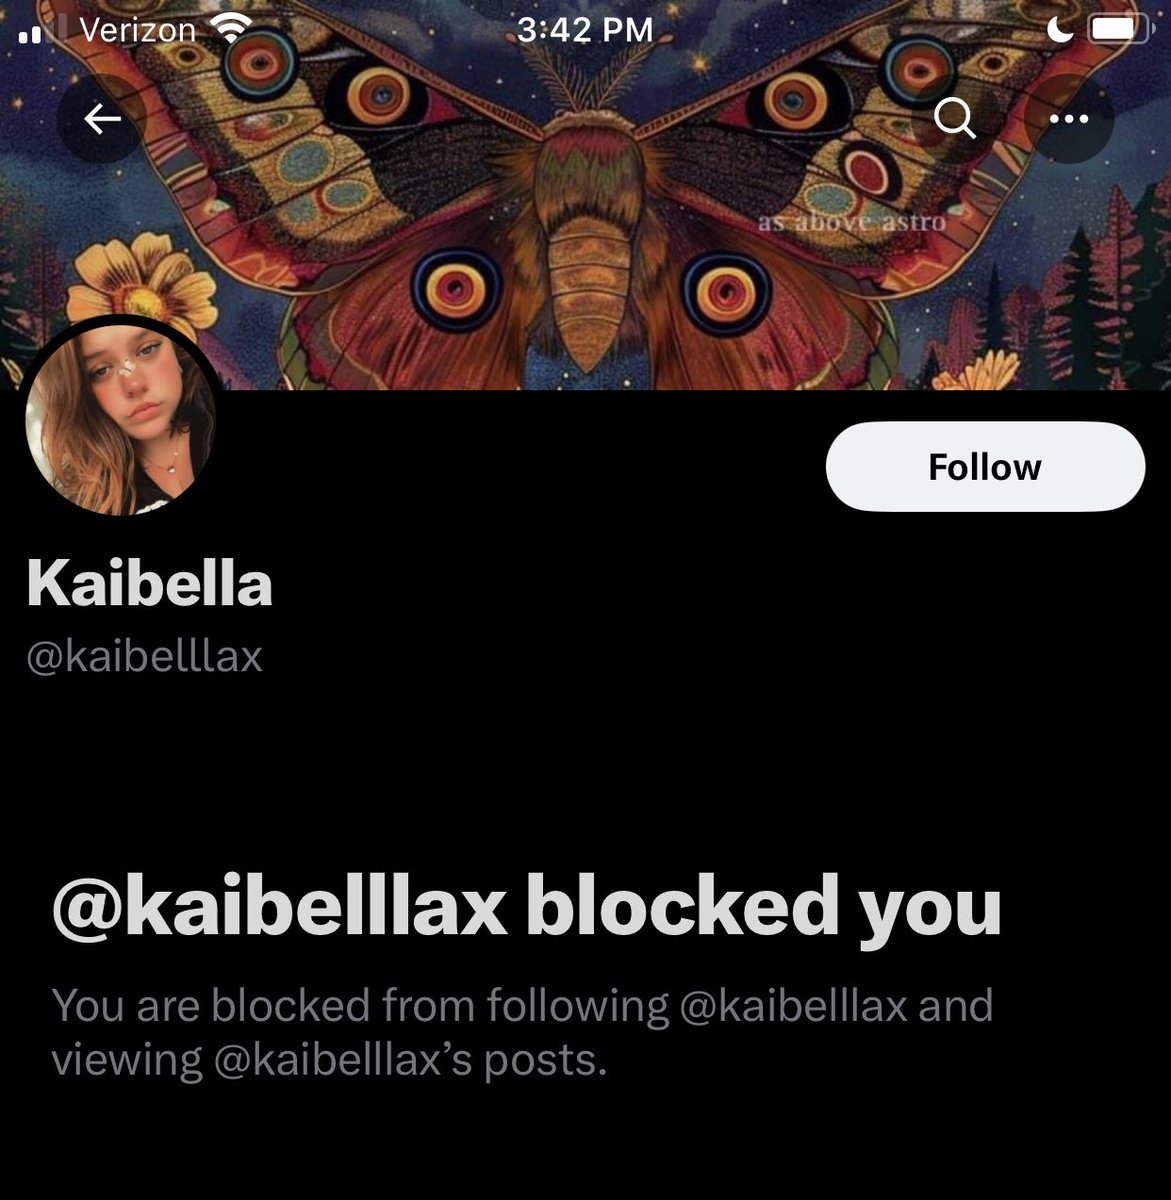 LOL kuntbella is a mentally unstable little bitch. I made ONE comment telling her she was reaching ab “ffg hitting her dog” and BOOM 💥 

She’s gonna have to block the entire internet if she keeps embarrassing herself like this 😂